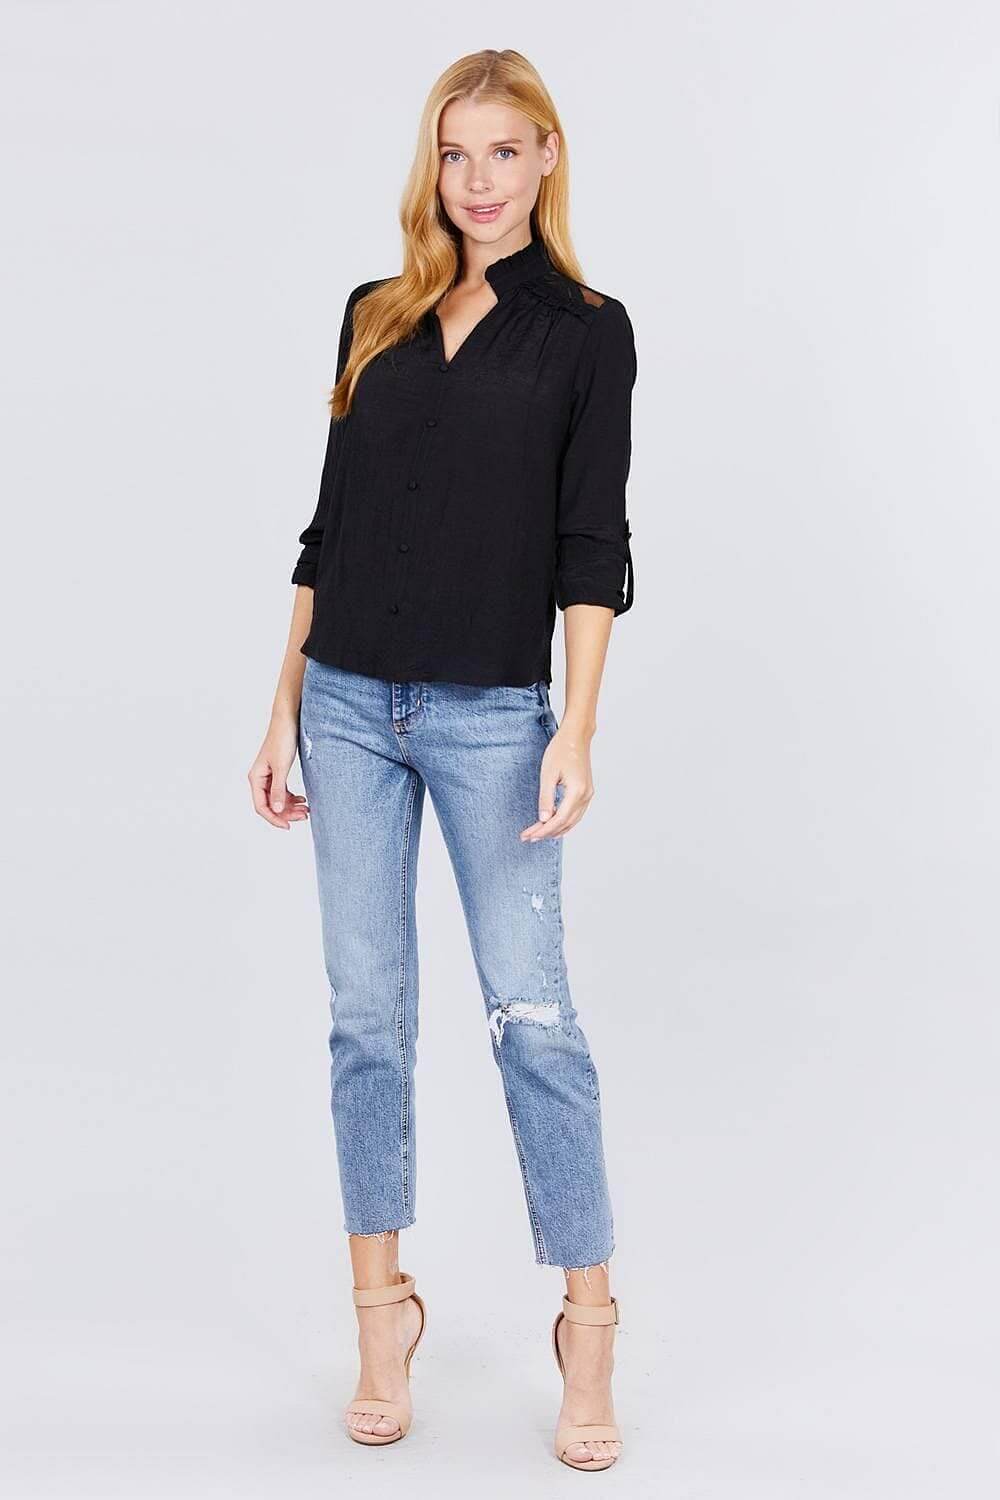 Black Long Sleeve V-Neck Button Down Top - Shopping Therapy L Top